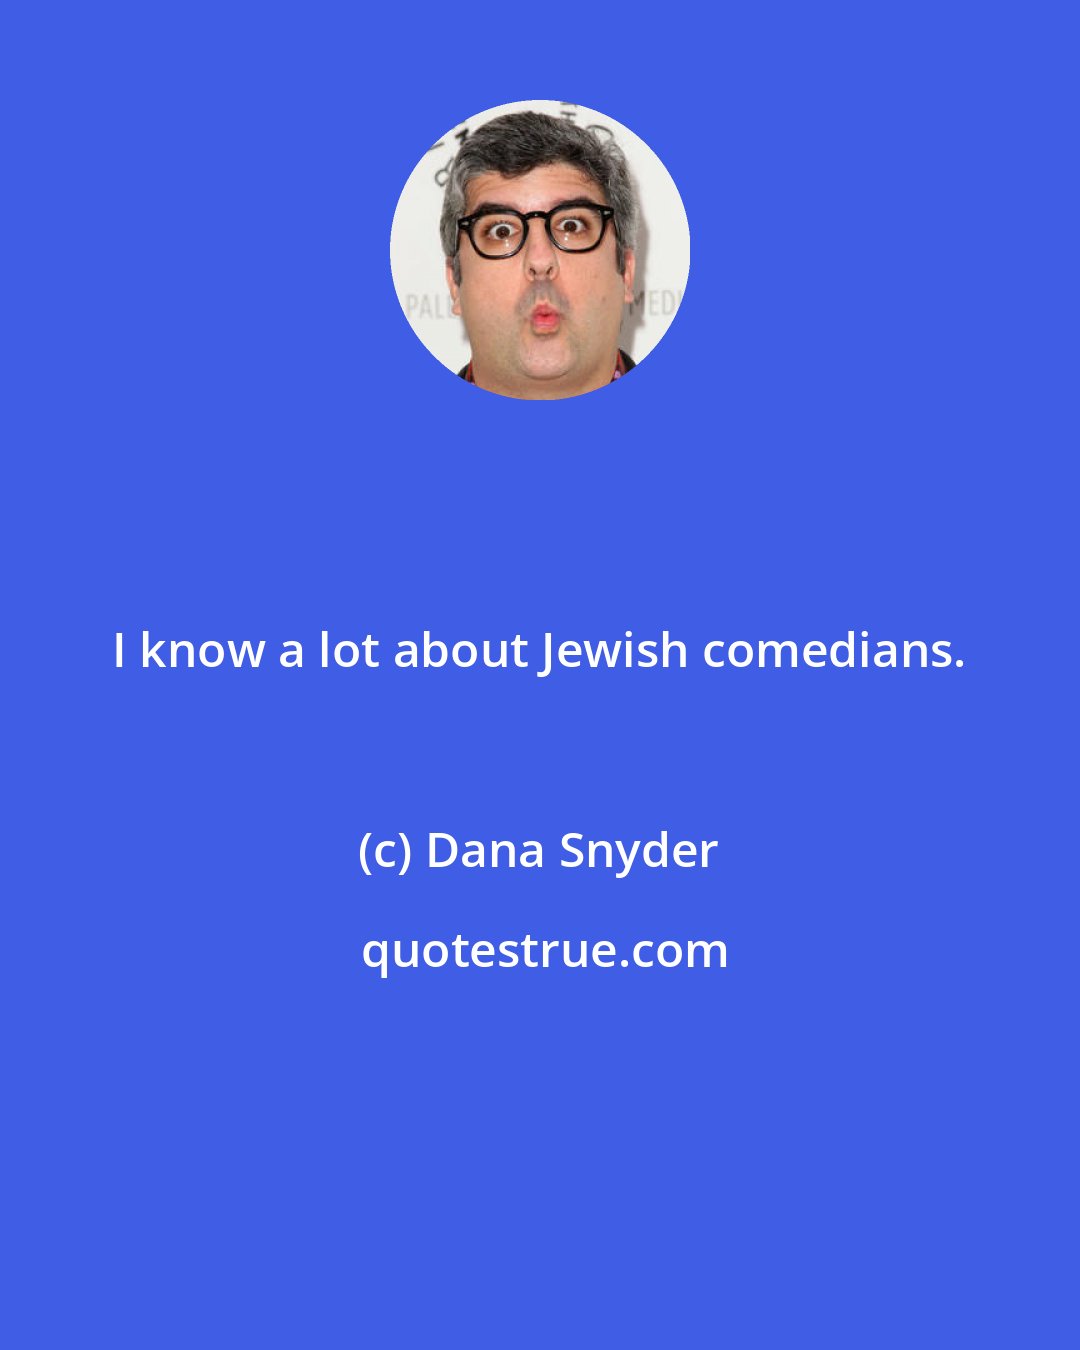 Dana Snyder: I know a lot about Jewish comedians.